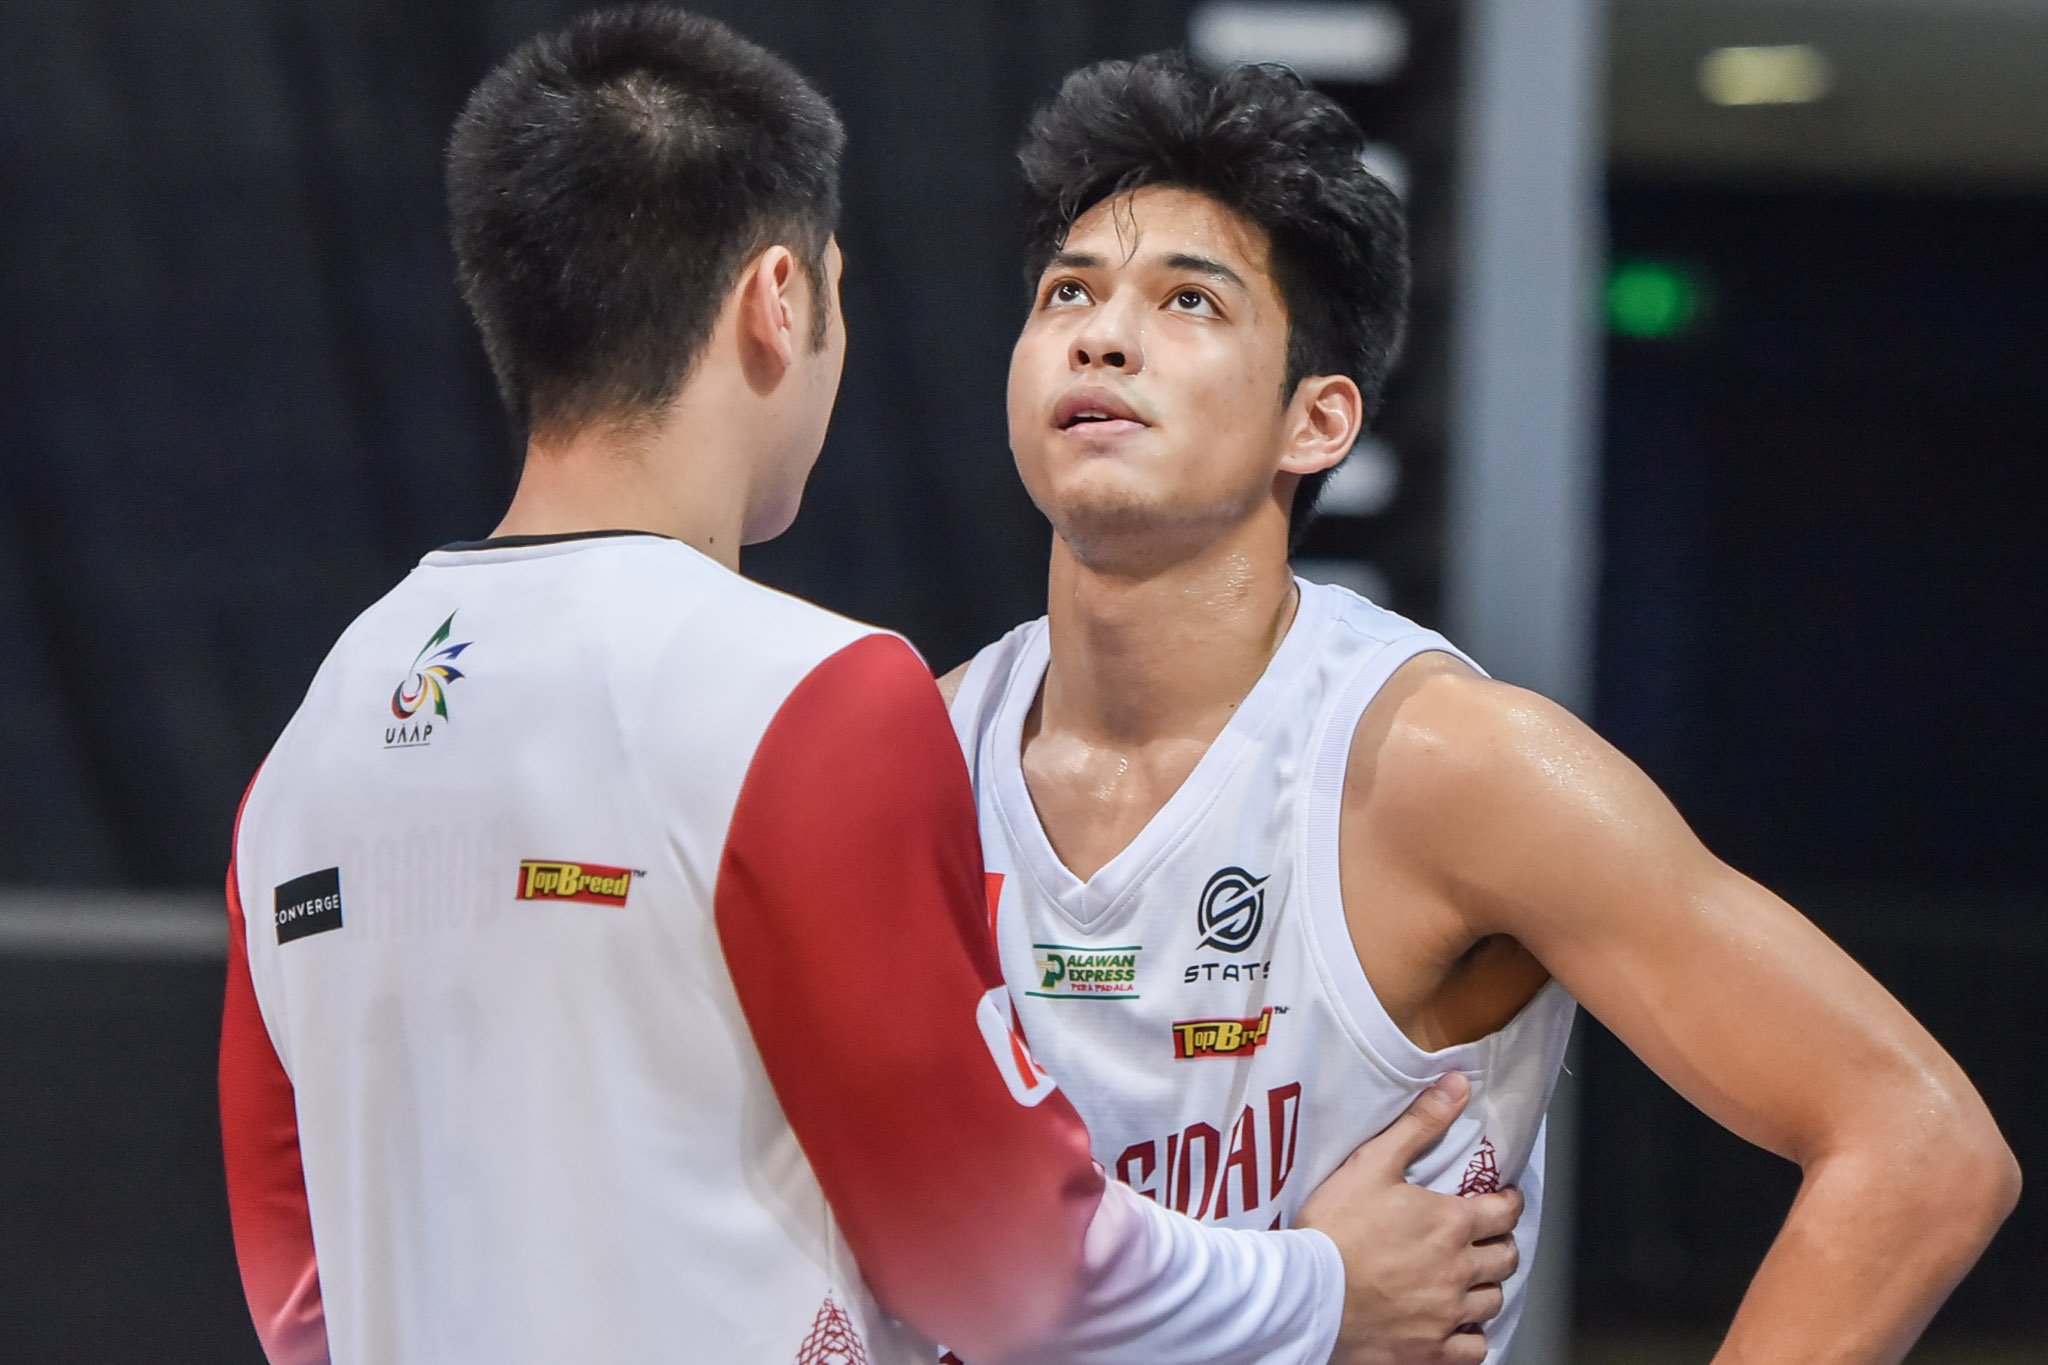 UAAP-84-MBB-ADMU-vs.-UP-Finals-G2-Ricci-Rivero-3140 Goldwin refuses to blame Ricci, takes responsibility for endgame error Basketball News UAAP UP  - philippine sports news